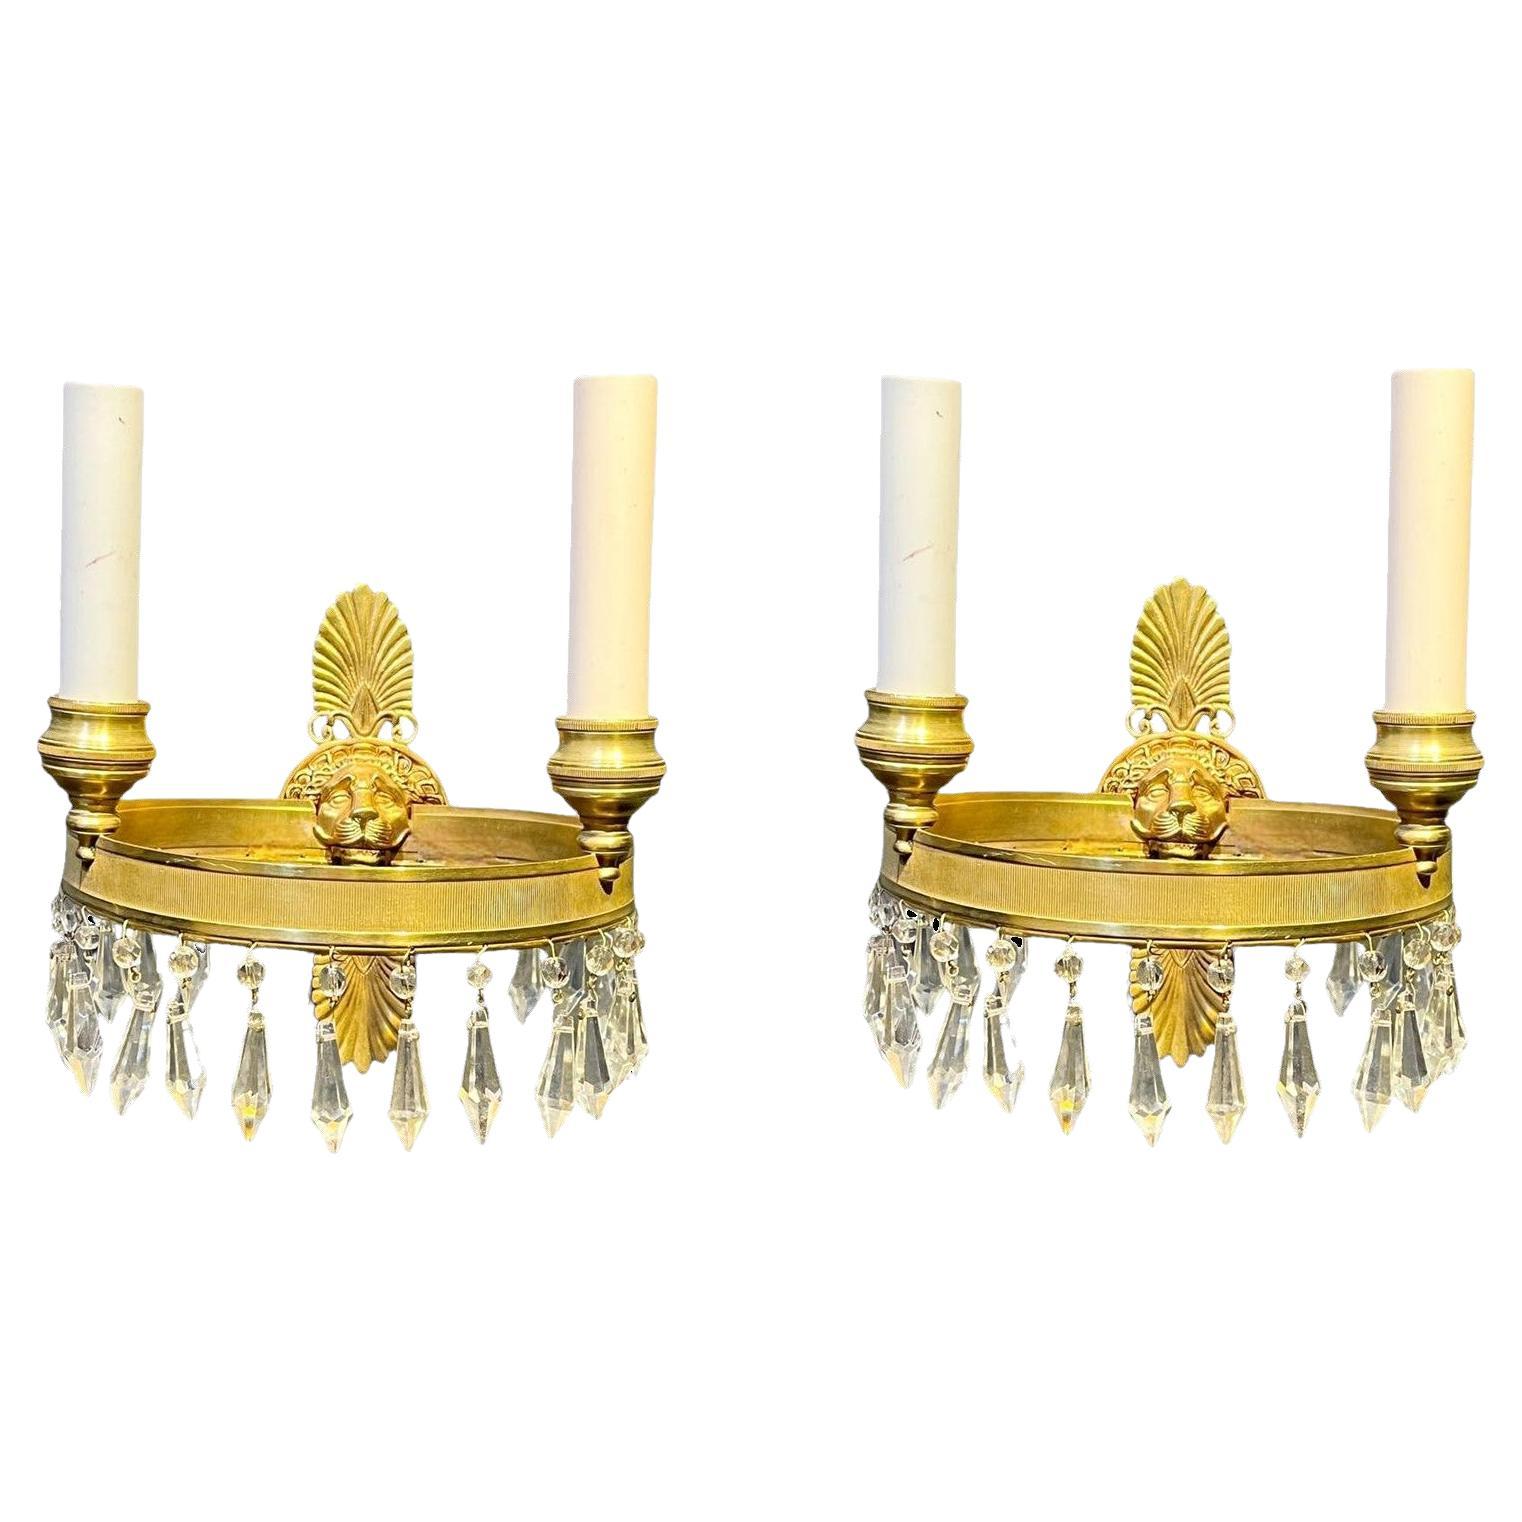 1930's French Empire Sconces with Lion's Head For Sale